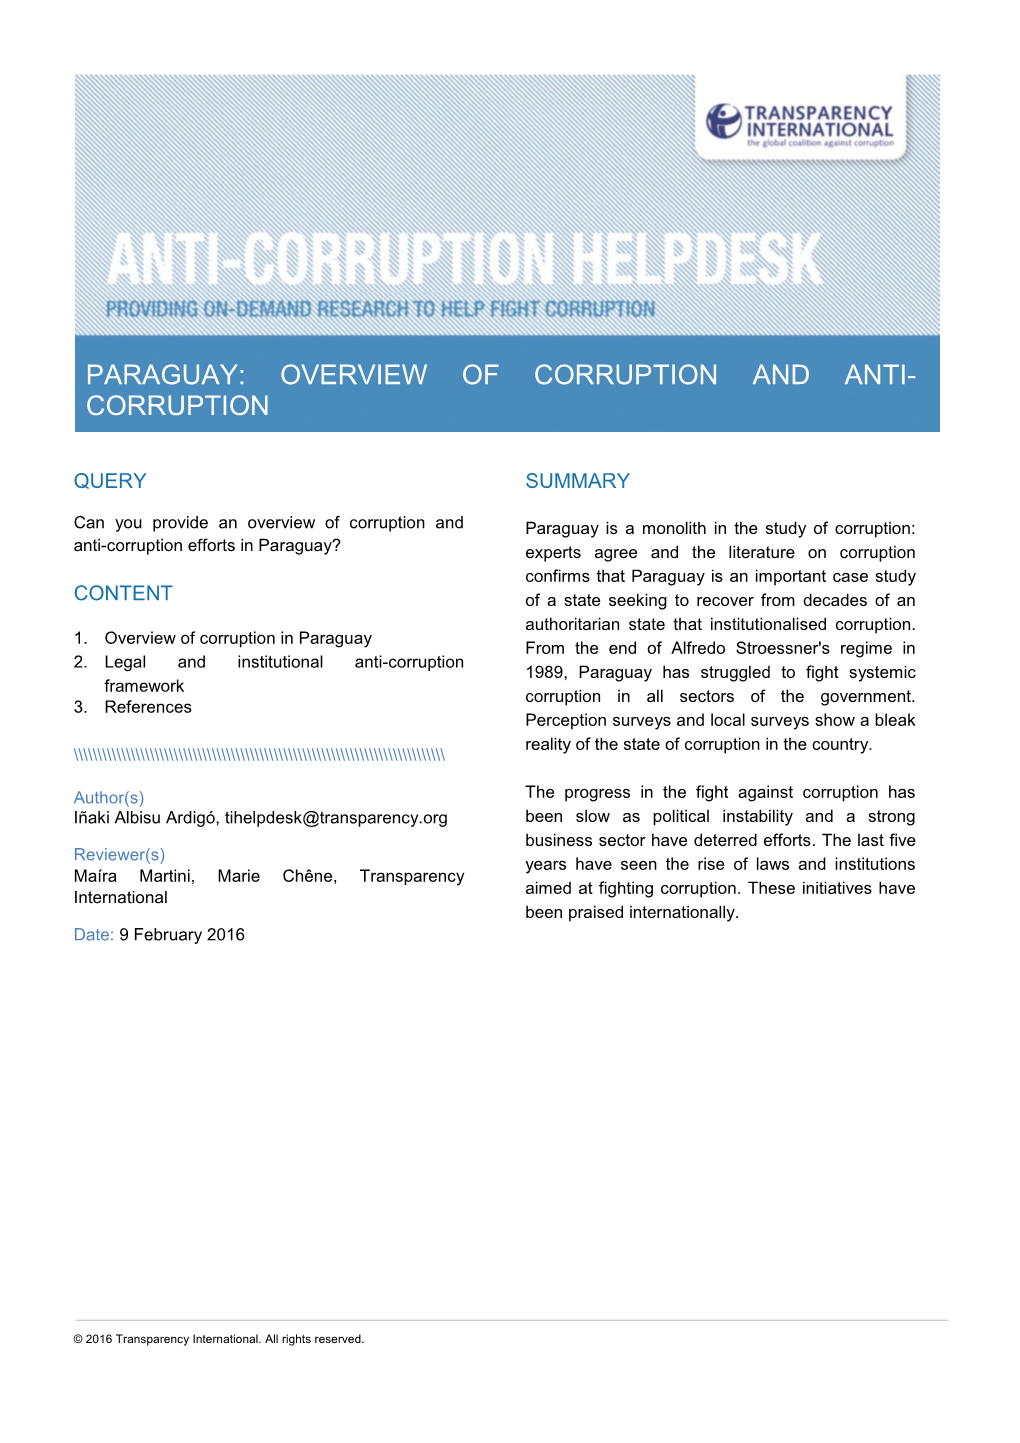 Paraguay: Overview of Corruption and Anti- Corruption